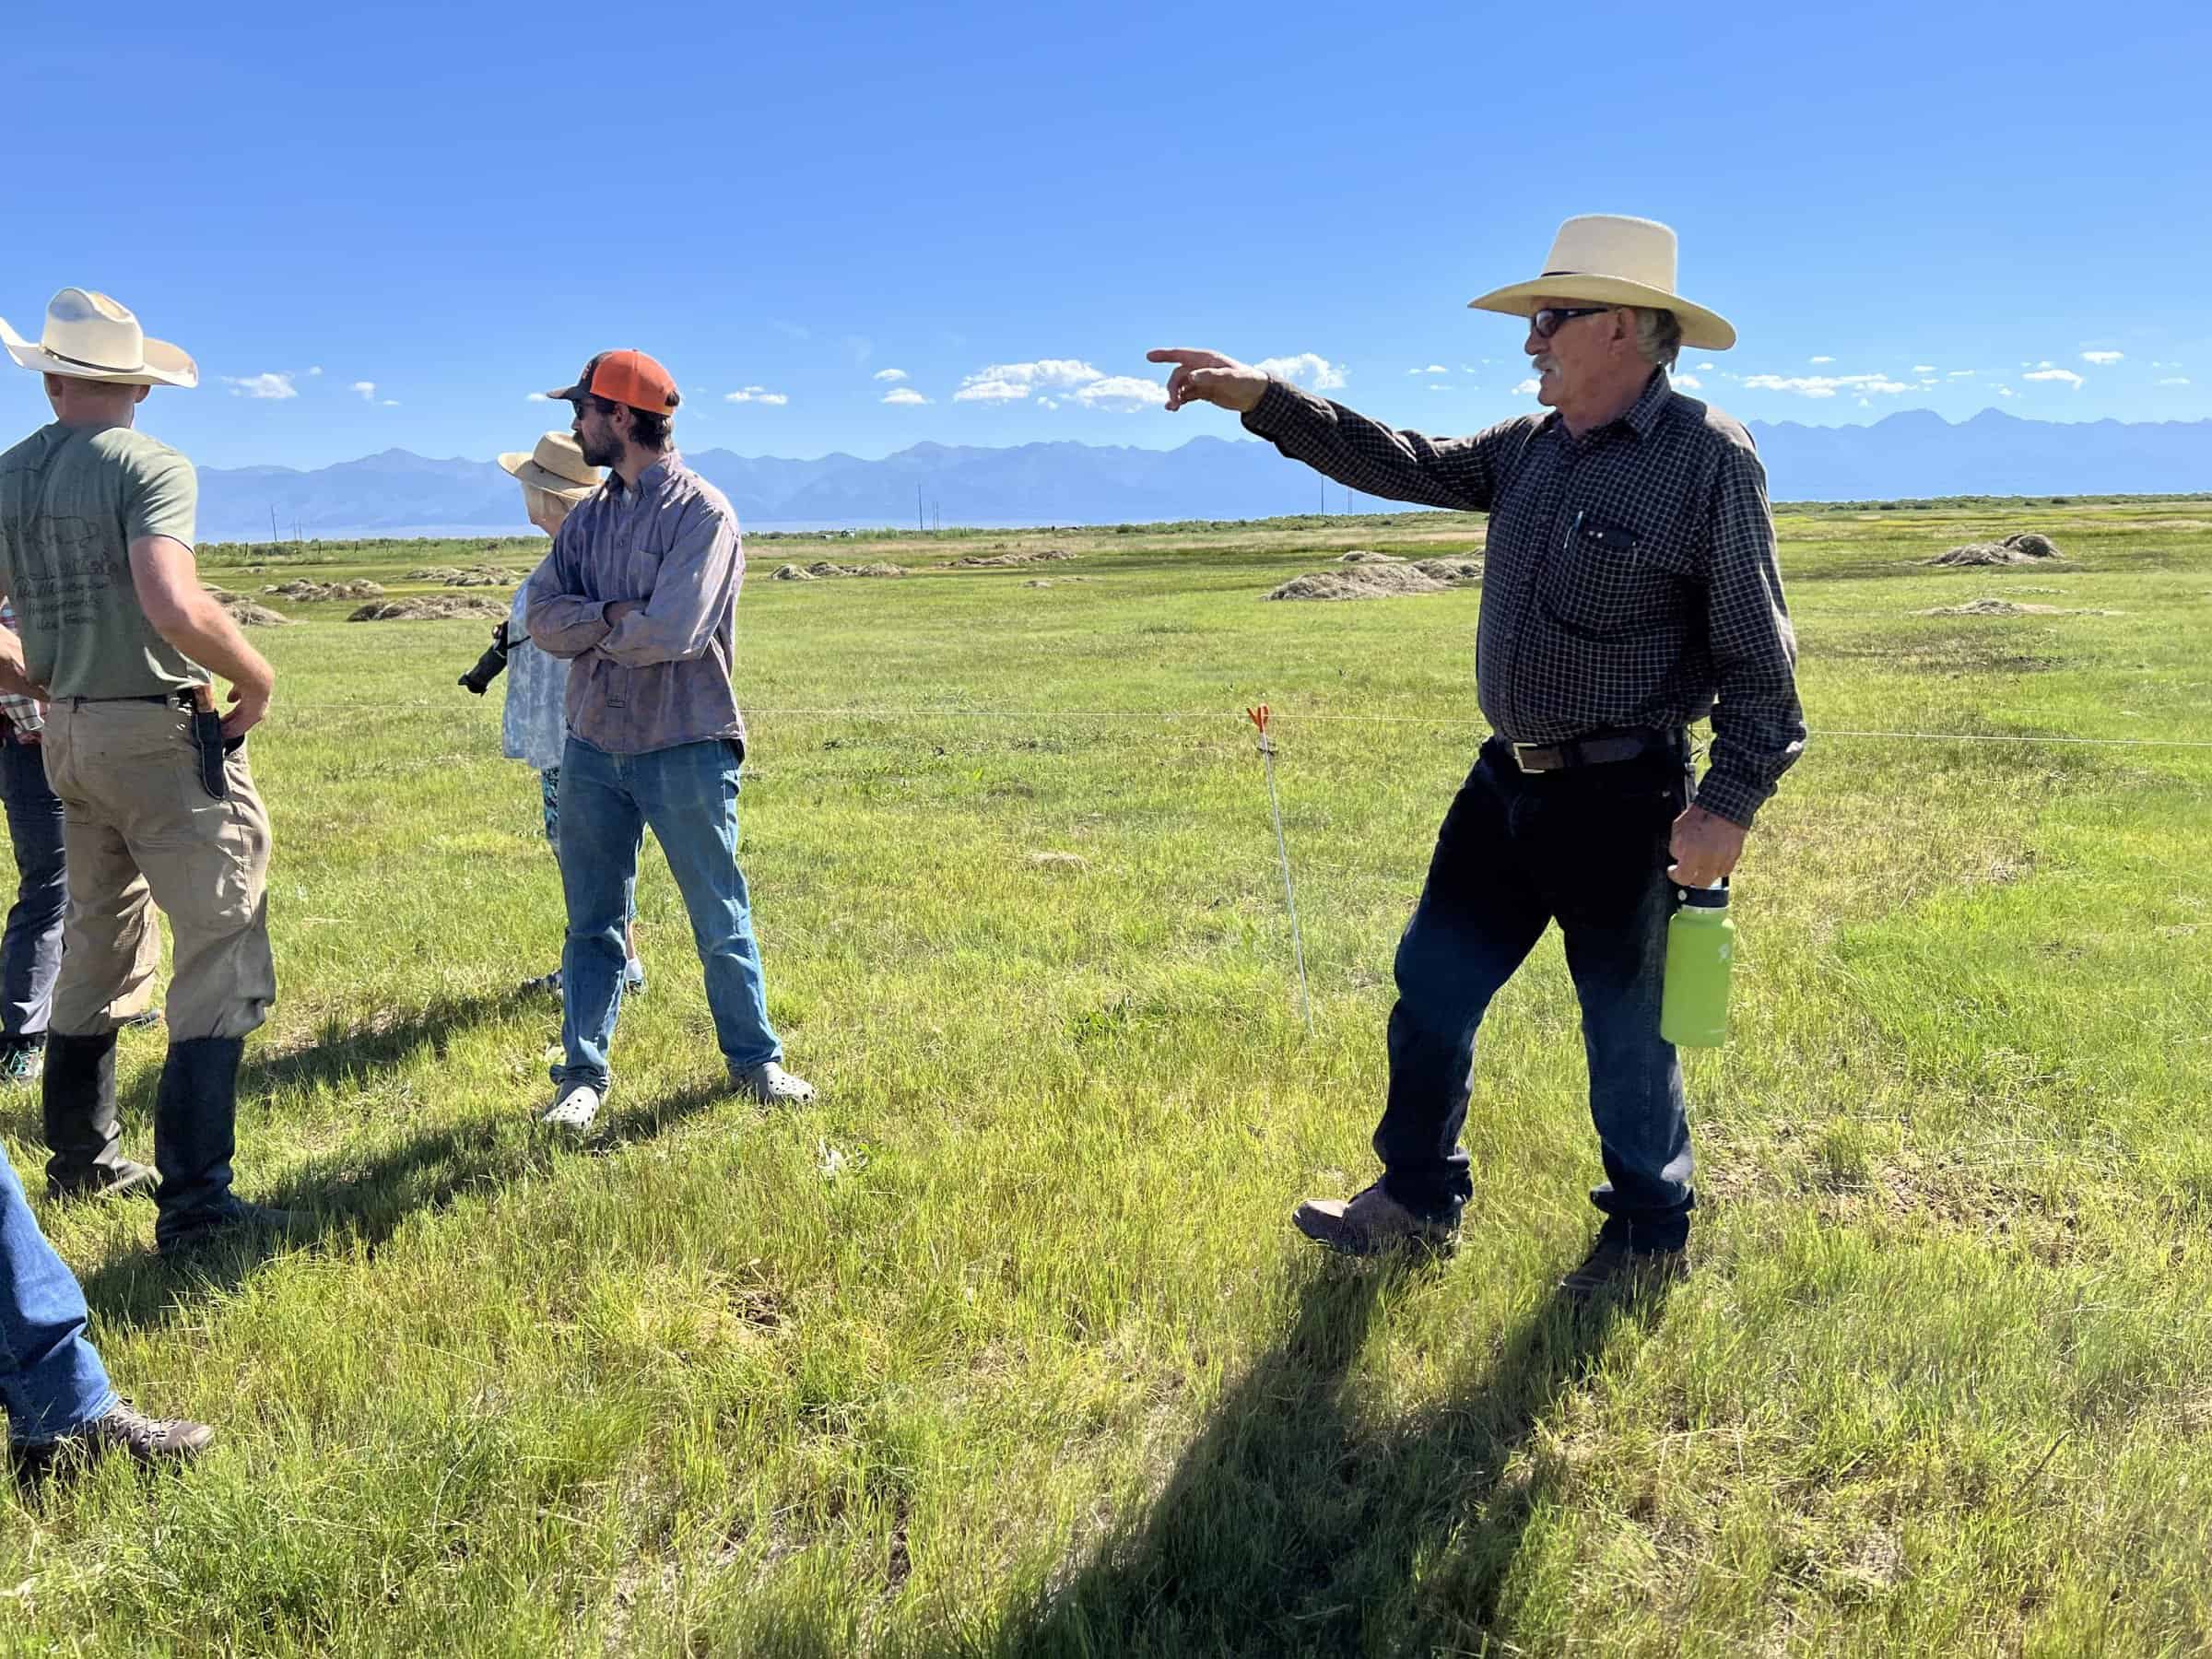 Rancher George Whitten points out in his green field to tour attendees